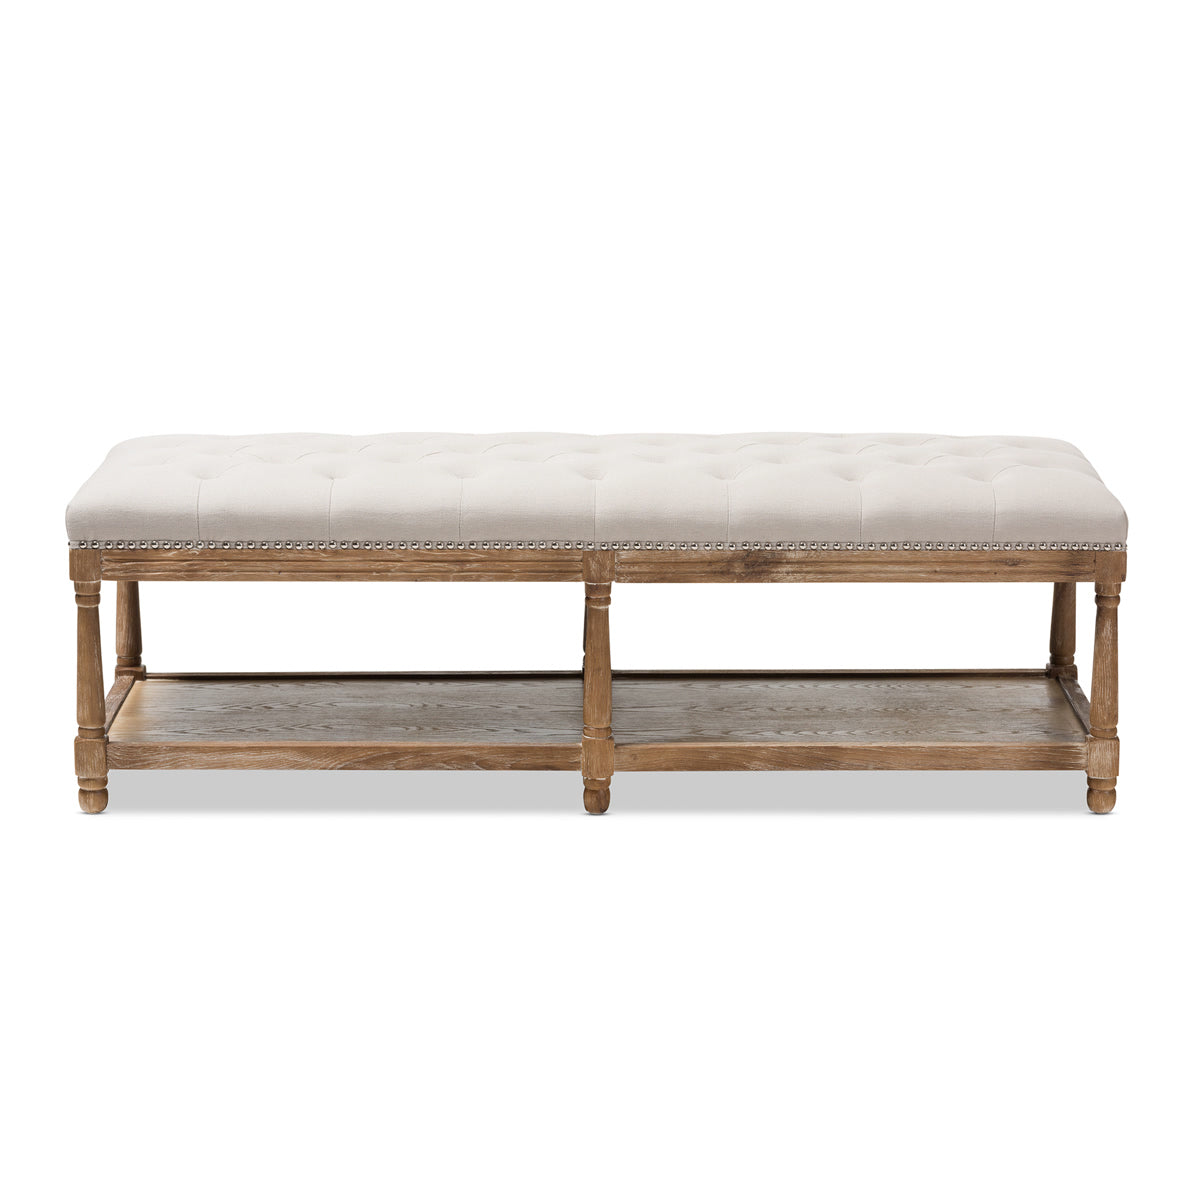 Baxton Studio Celeste French Country Weathered Oak Beige Linen Upholstered Ottoman Bench Baxton Studio-benches-Minimal And Modern - 3